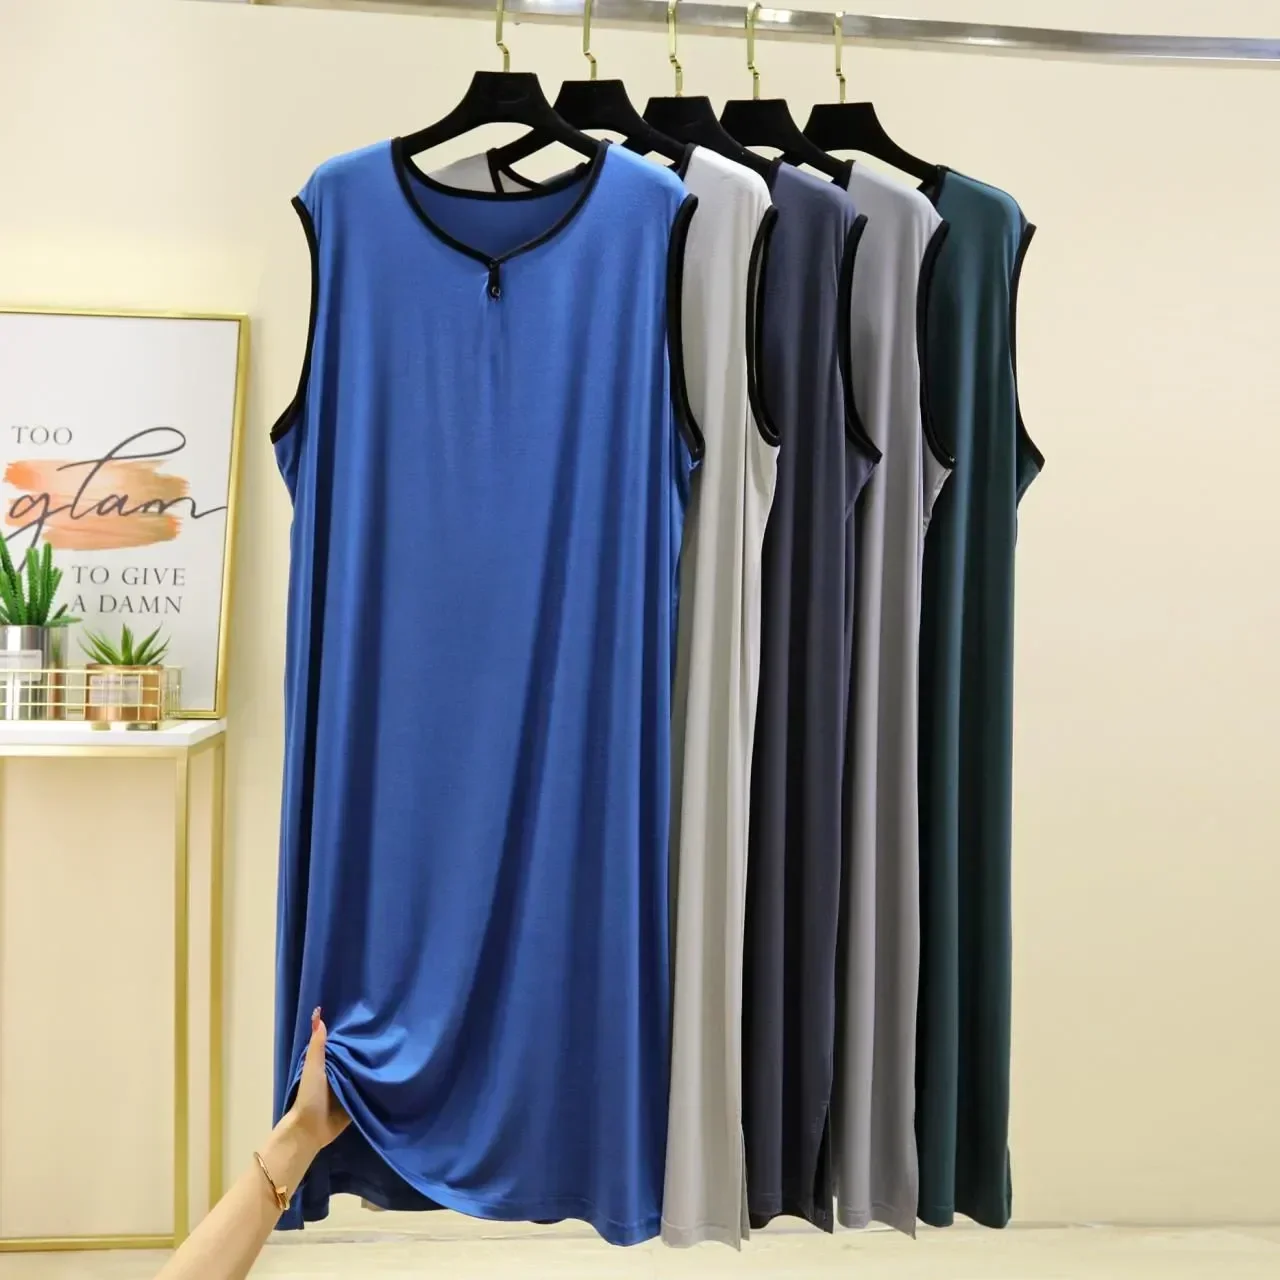 

Plus Loose Tops Size Nightshirt Summer Modal Long Sleeveless Solid Sleepwear Pajamas Men Color Mid Cotton Thin for